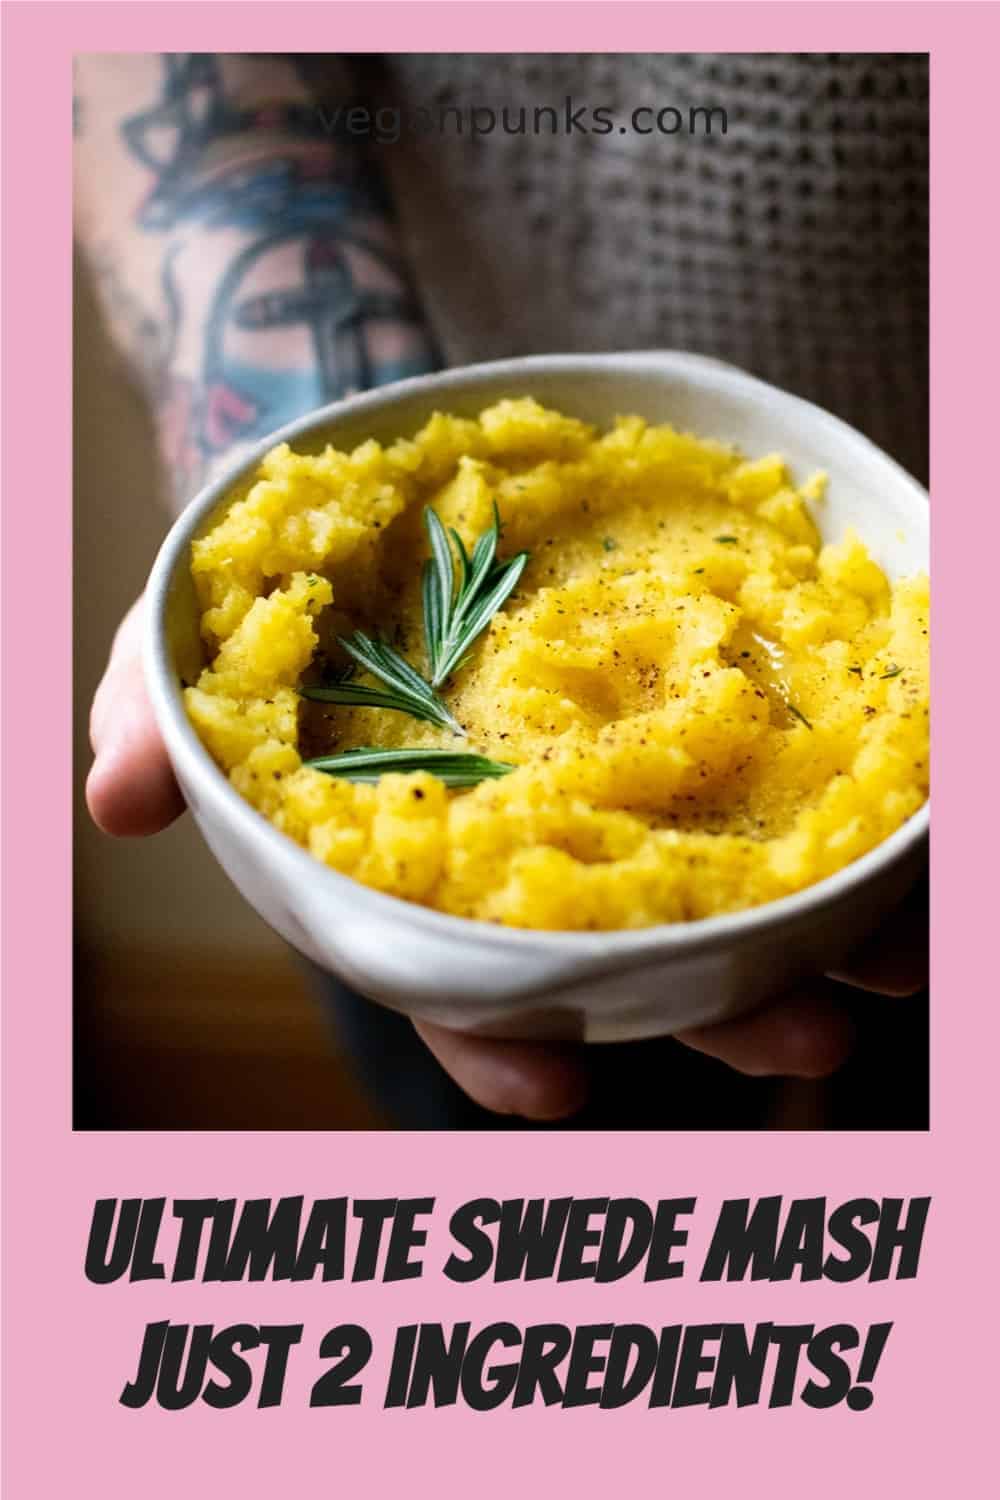 A Pinterest image with a pink border and a title written in black underneath the image of swede mash in a white bowl